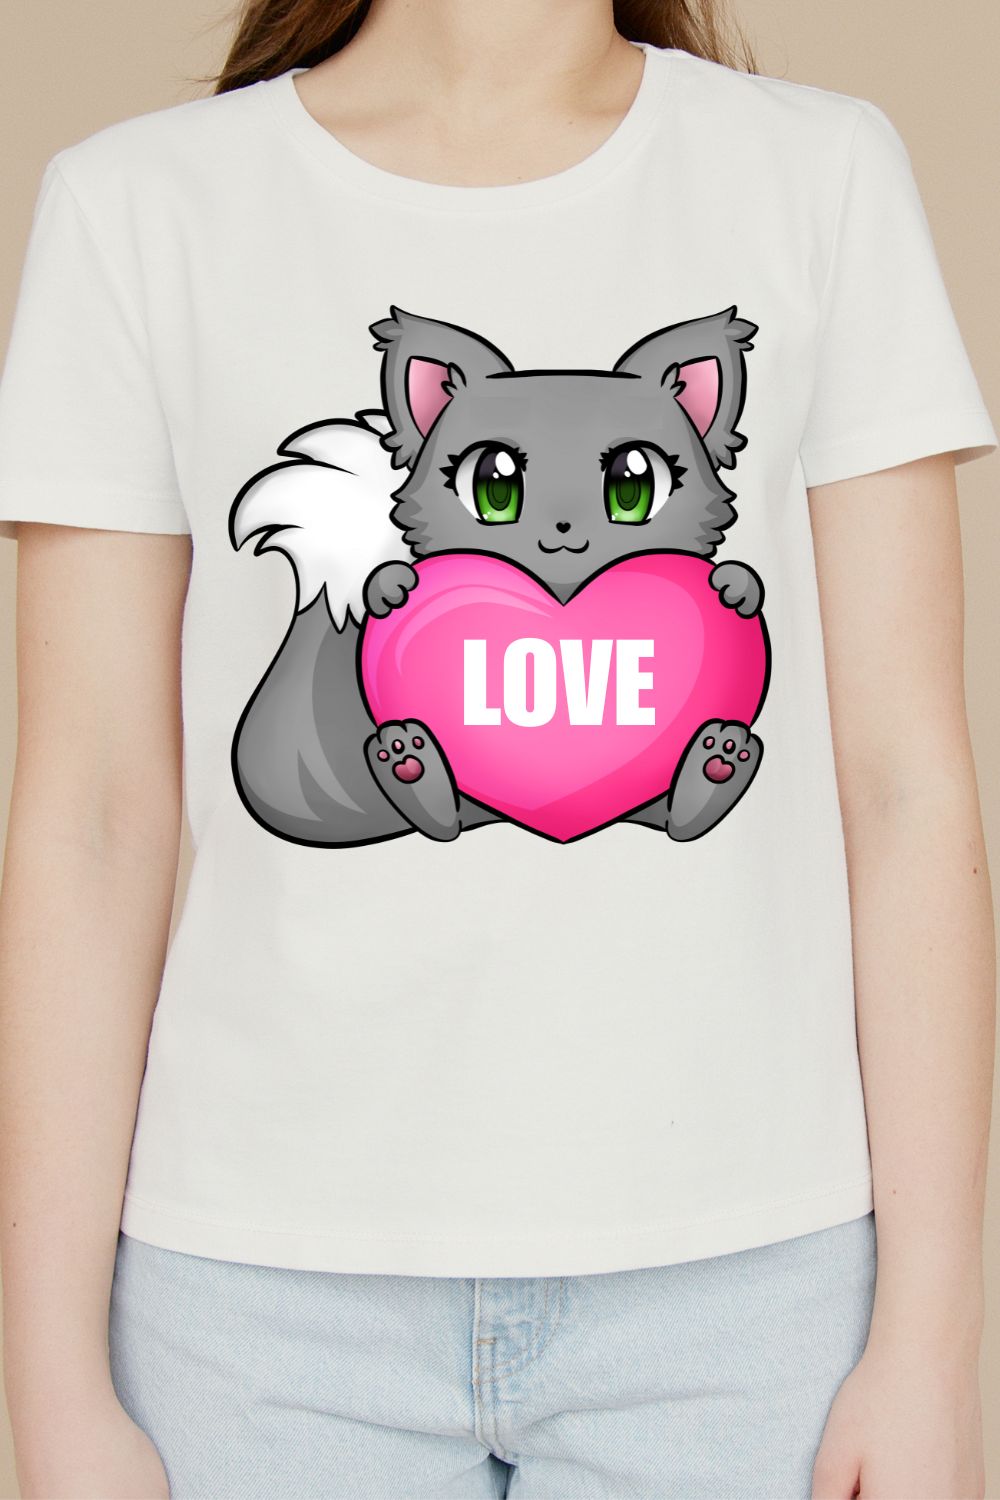 Cute Cat with heart - Love pinterest preview image.